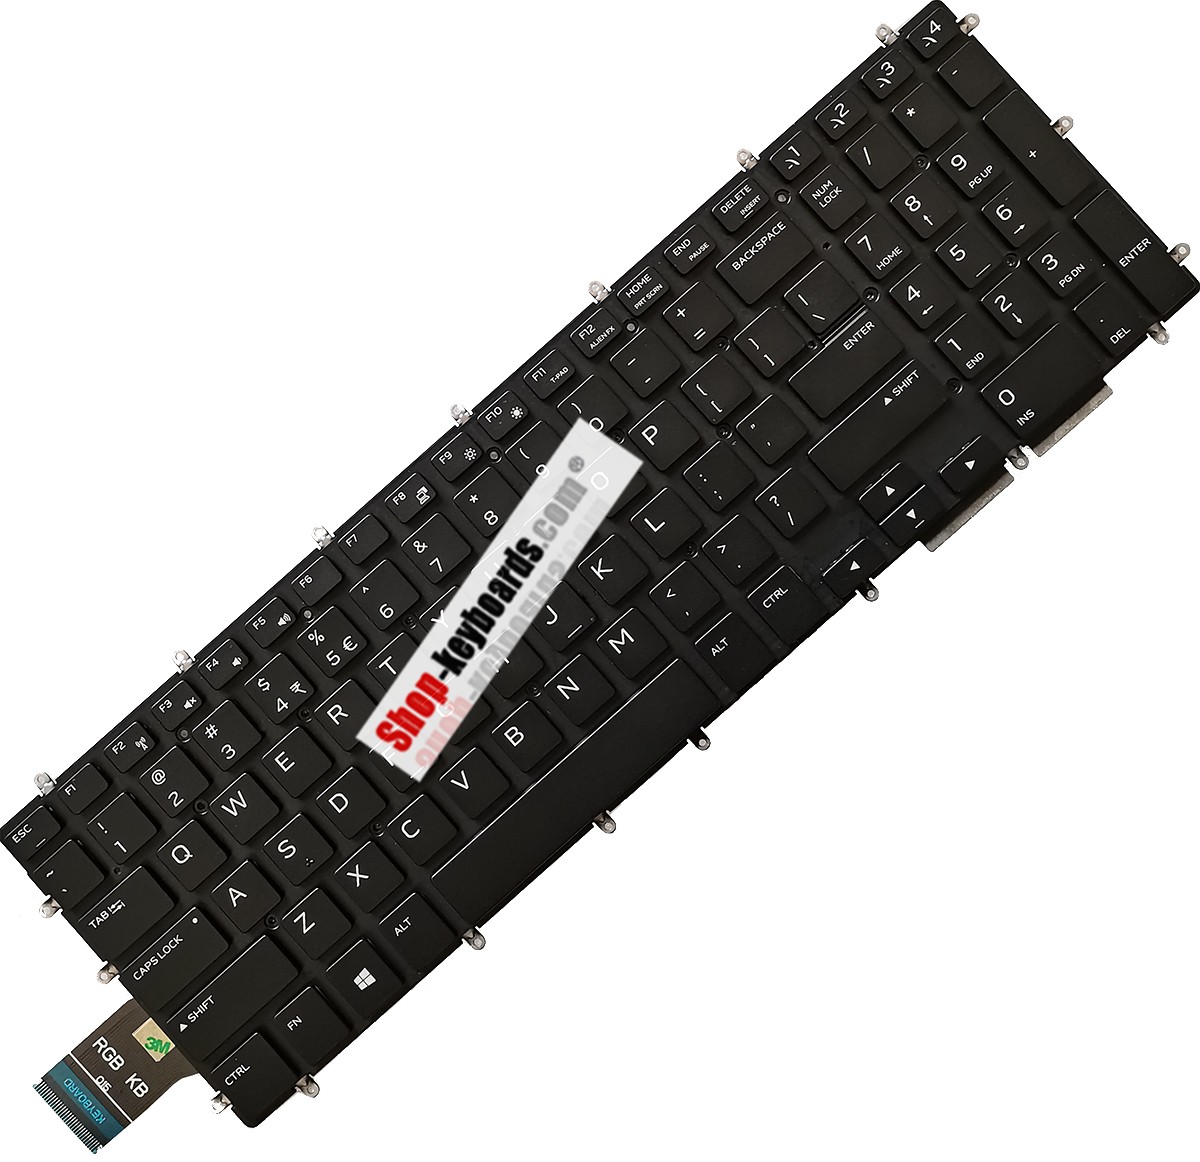 Dell OK5Y90  Keyboard replacement